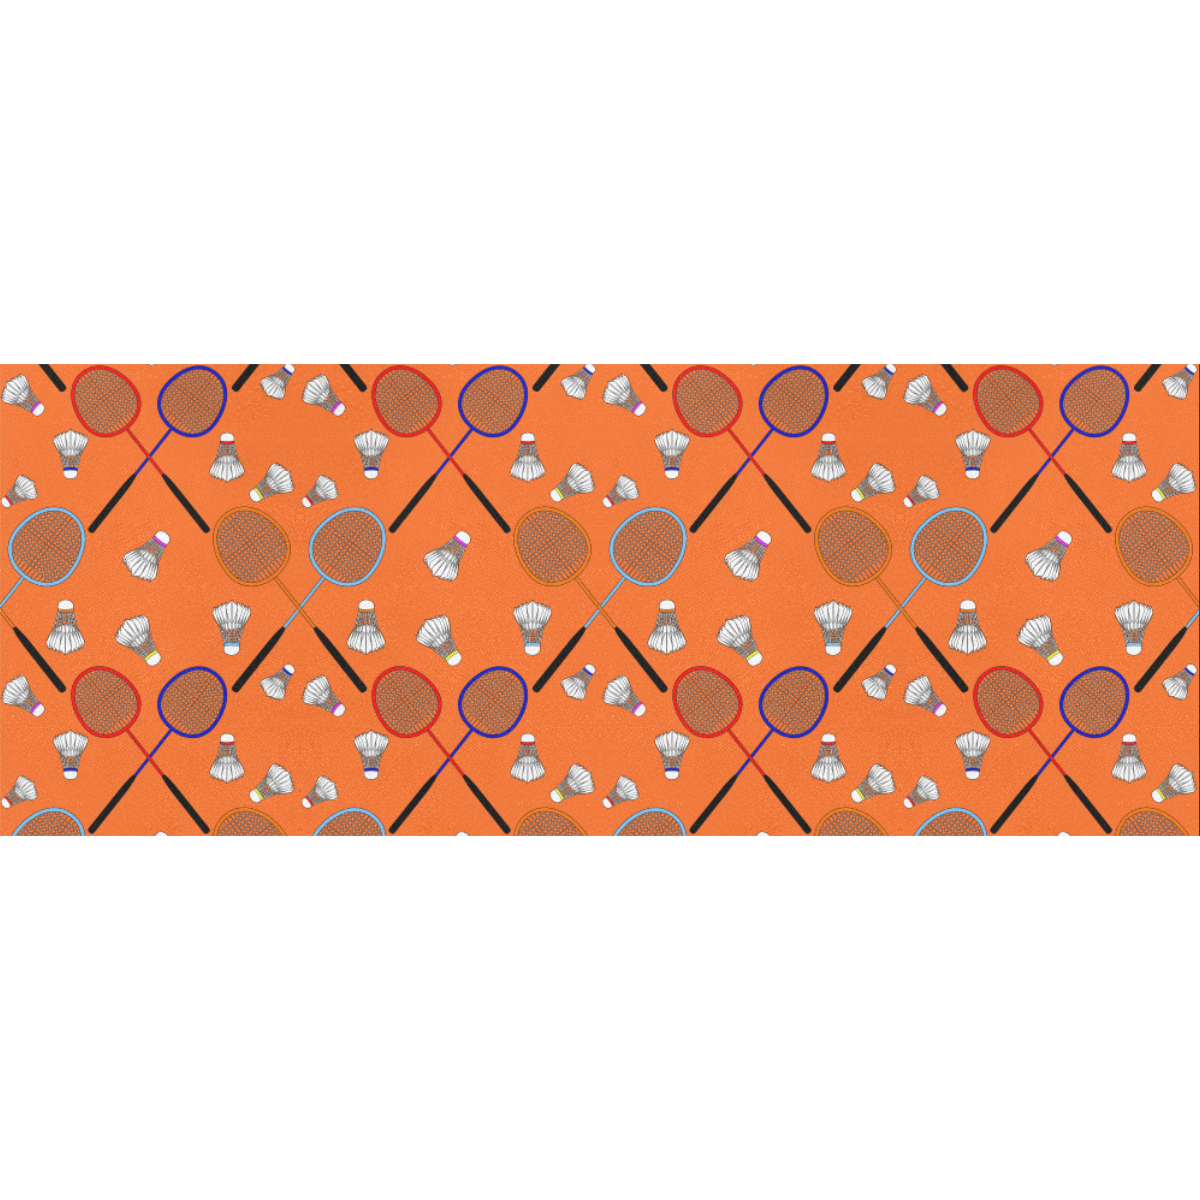 Badminton Rackets and Shuttlecocks Pattern Sports Orange Gift Wrapping Paper 58"x 23" (2 Rolls)